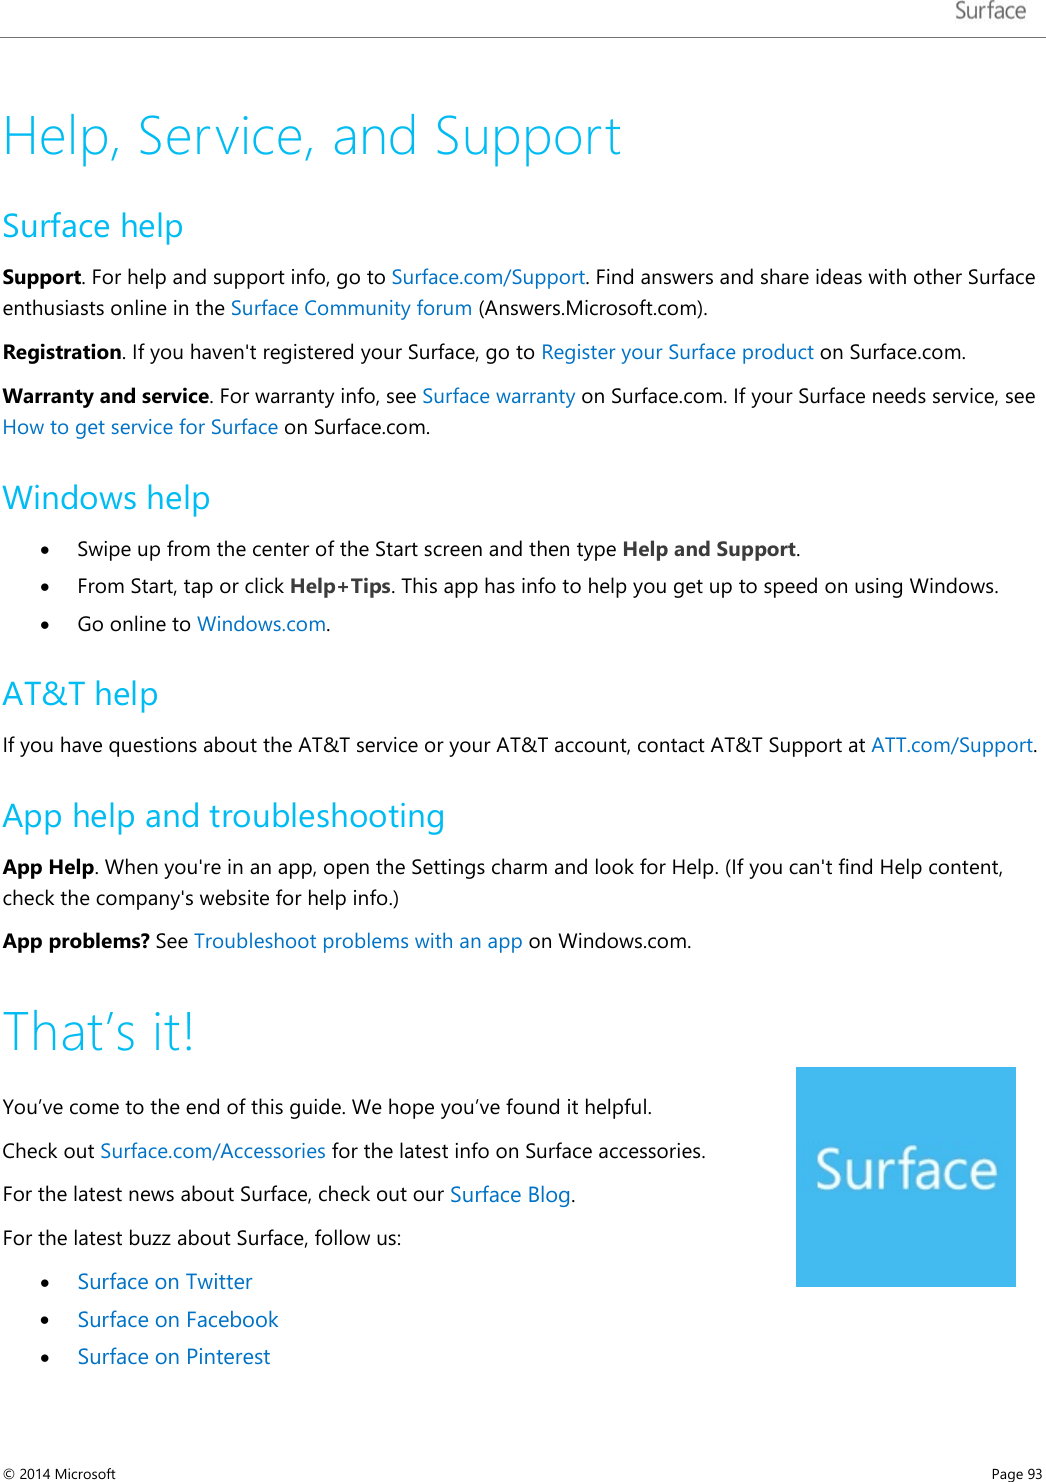   Help, Service, and Support Surface help  Support. For help and support info, go to Surface.com/Support. Find answers and share ideas with other Surface enthusiasts online in the Surface Community forum (Answers.Microsoft.com). Registration. If you haven&apos;t registered your Surface, go to Register your Surface product on Surface.com.   Warranty and service. For warranty info, see Surface warranty on Surface.com. If your Surface needs service, see How to get service for Surface on Surface.com.  Windows help • Swipe up from the center of the Start screen and then type Help and Support. • From Start, tap or click Help+Tips. This app has info to help you get up to speed on using Windows. • Go online to Windows.com. AT&amp;T help If you have questions about the AT&amp;T service or your AT&amp;T account, contact AT&amp;T Support at ATT.com/Support. App help and troubleshooting App Help. When you&apos;re in an app, open the Settings charm and look for Help. (If you can&apos;t find Help content, check the company&apos;s website for help info.)  App problems? See Troubleshoot problems with an app on Windows.com. That’s it! You’ve come to the end of this guide. We hope you’ve found it helpful.  Check out Surface.com/Accessories for the latest info on Surface accessories. For the latest news about Surface, check out our Surface Blog. For the latest buzz about Surface, follow us:  • Surface on Twitter  • Surface on Facebook  • Surface on Pinterest  © 2014 Microsoft     Page 93  